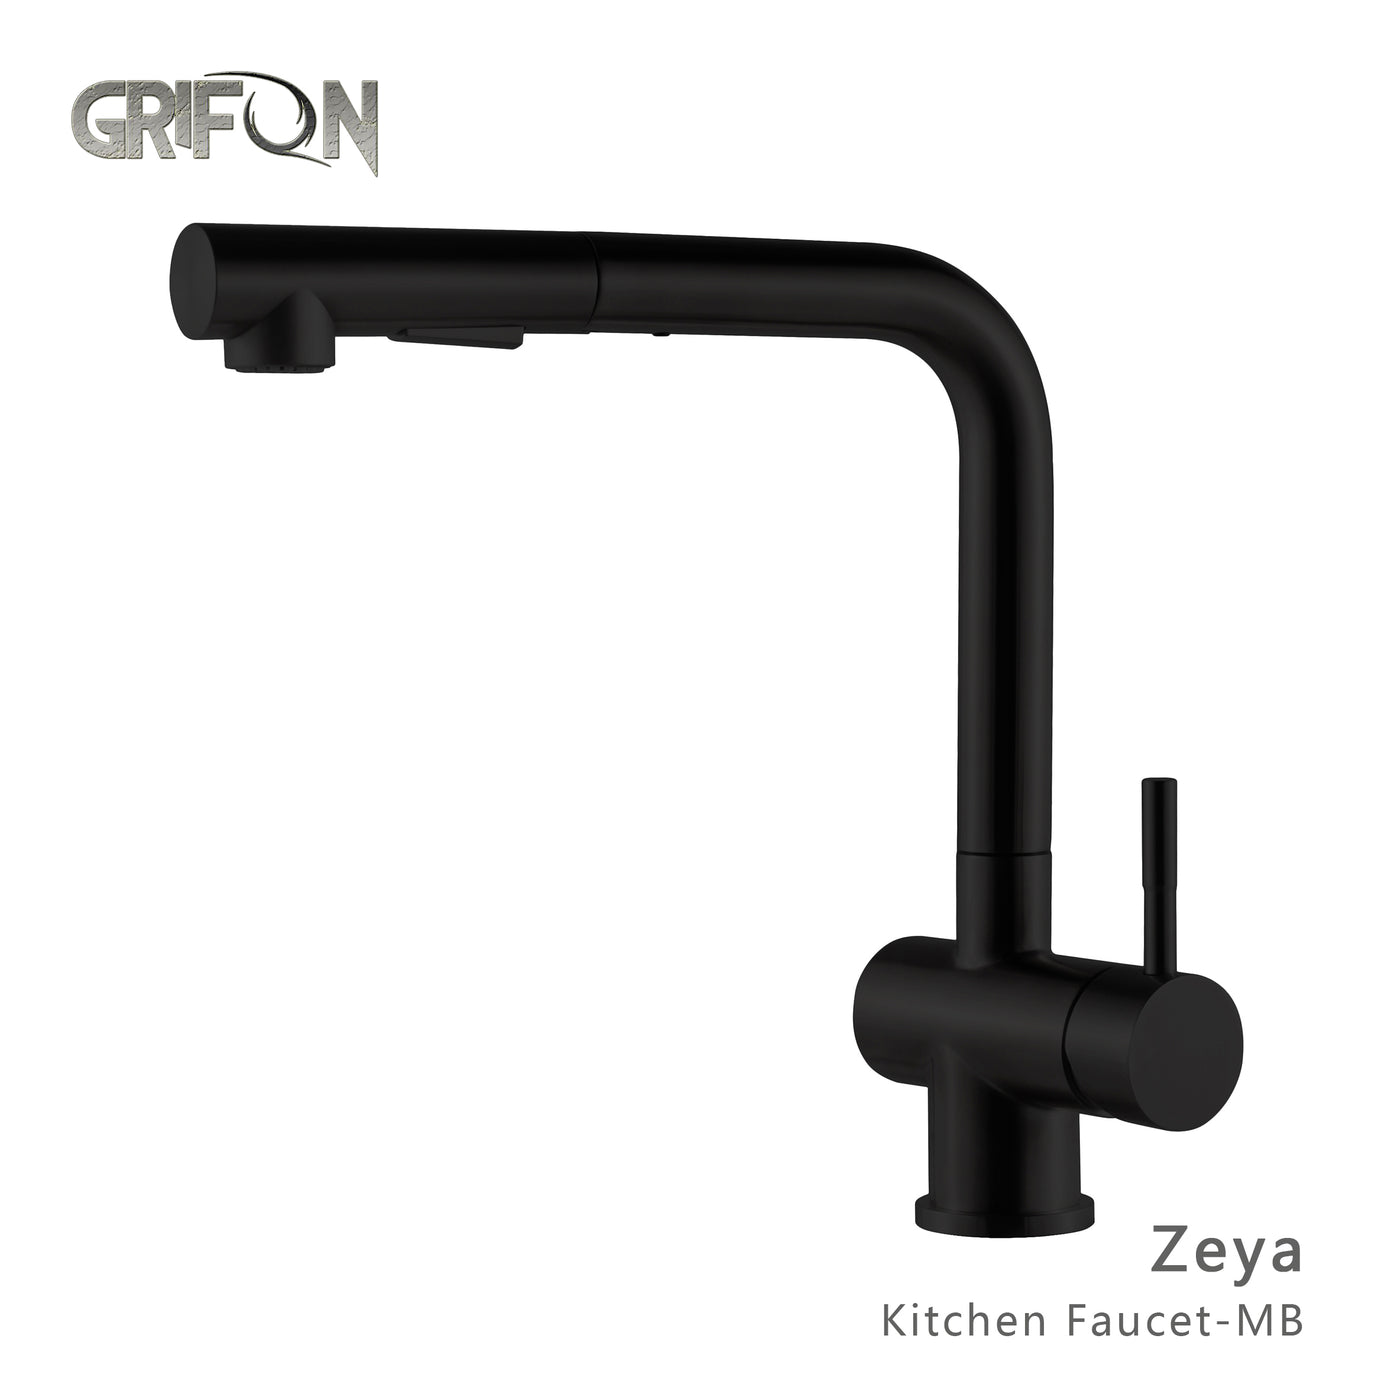 ZEYA™ GF405 Contemporary Style Single-Handle Kitchen Sink Faucet with Pull-Down Sprayer